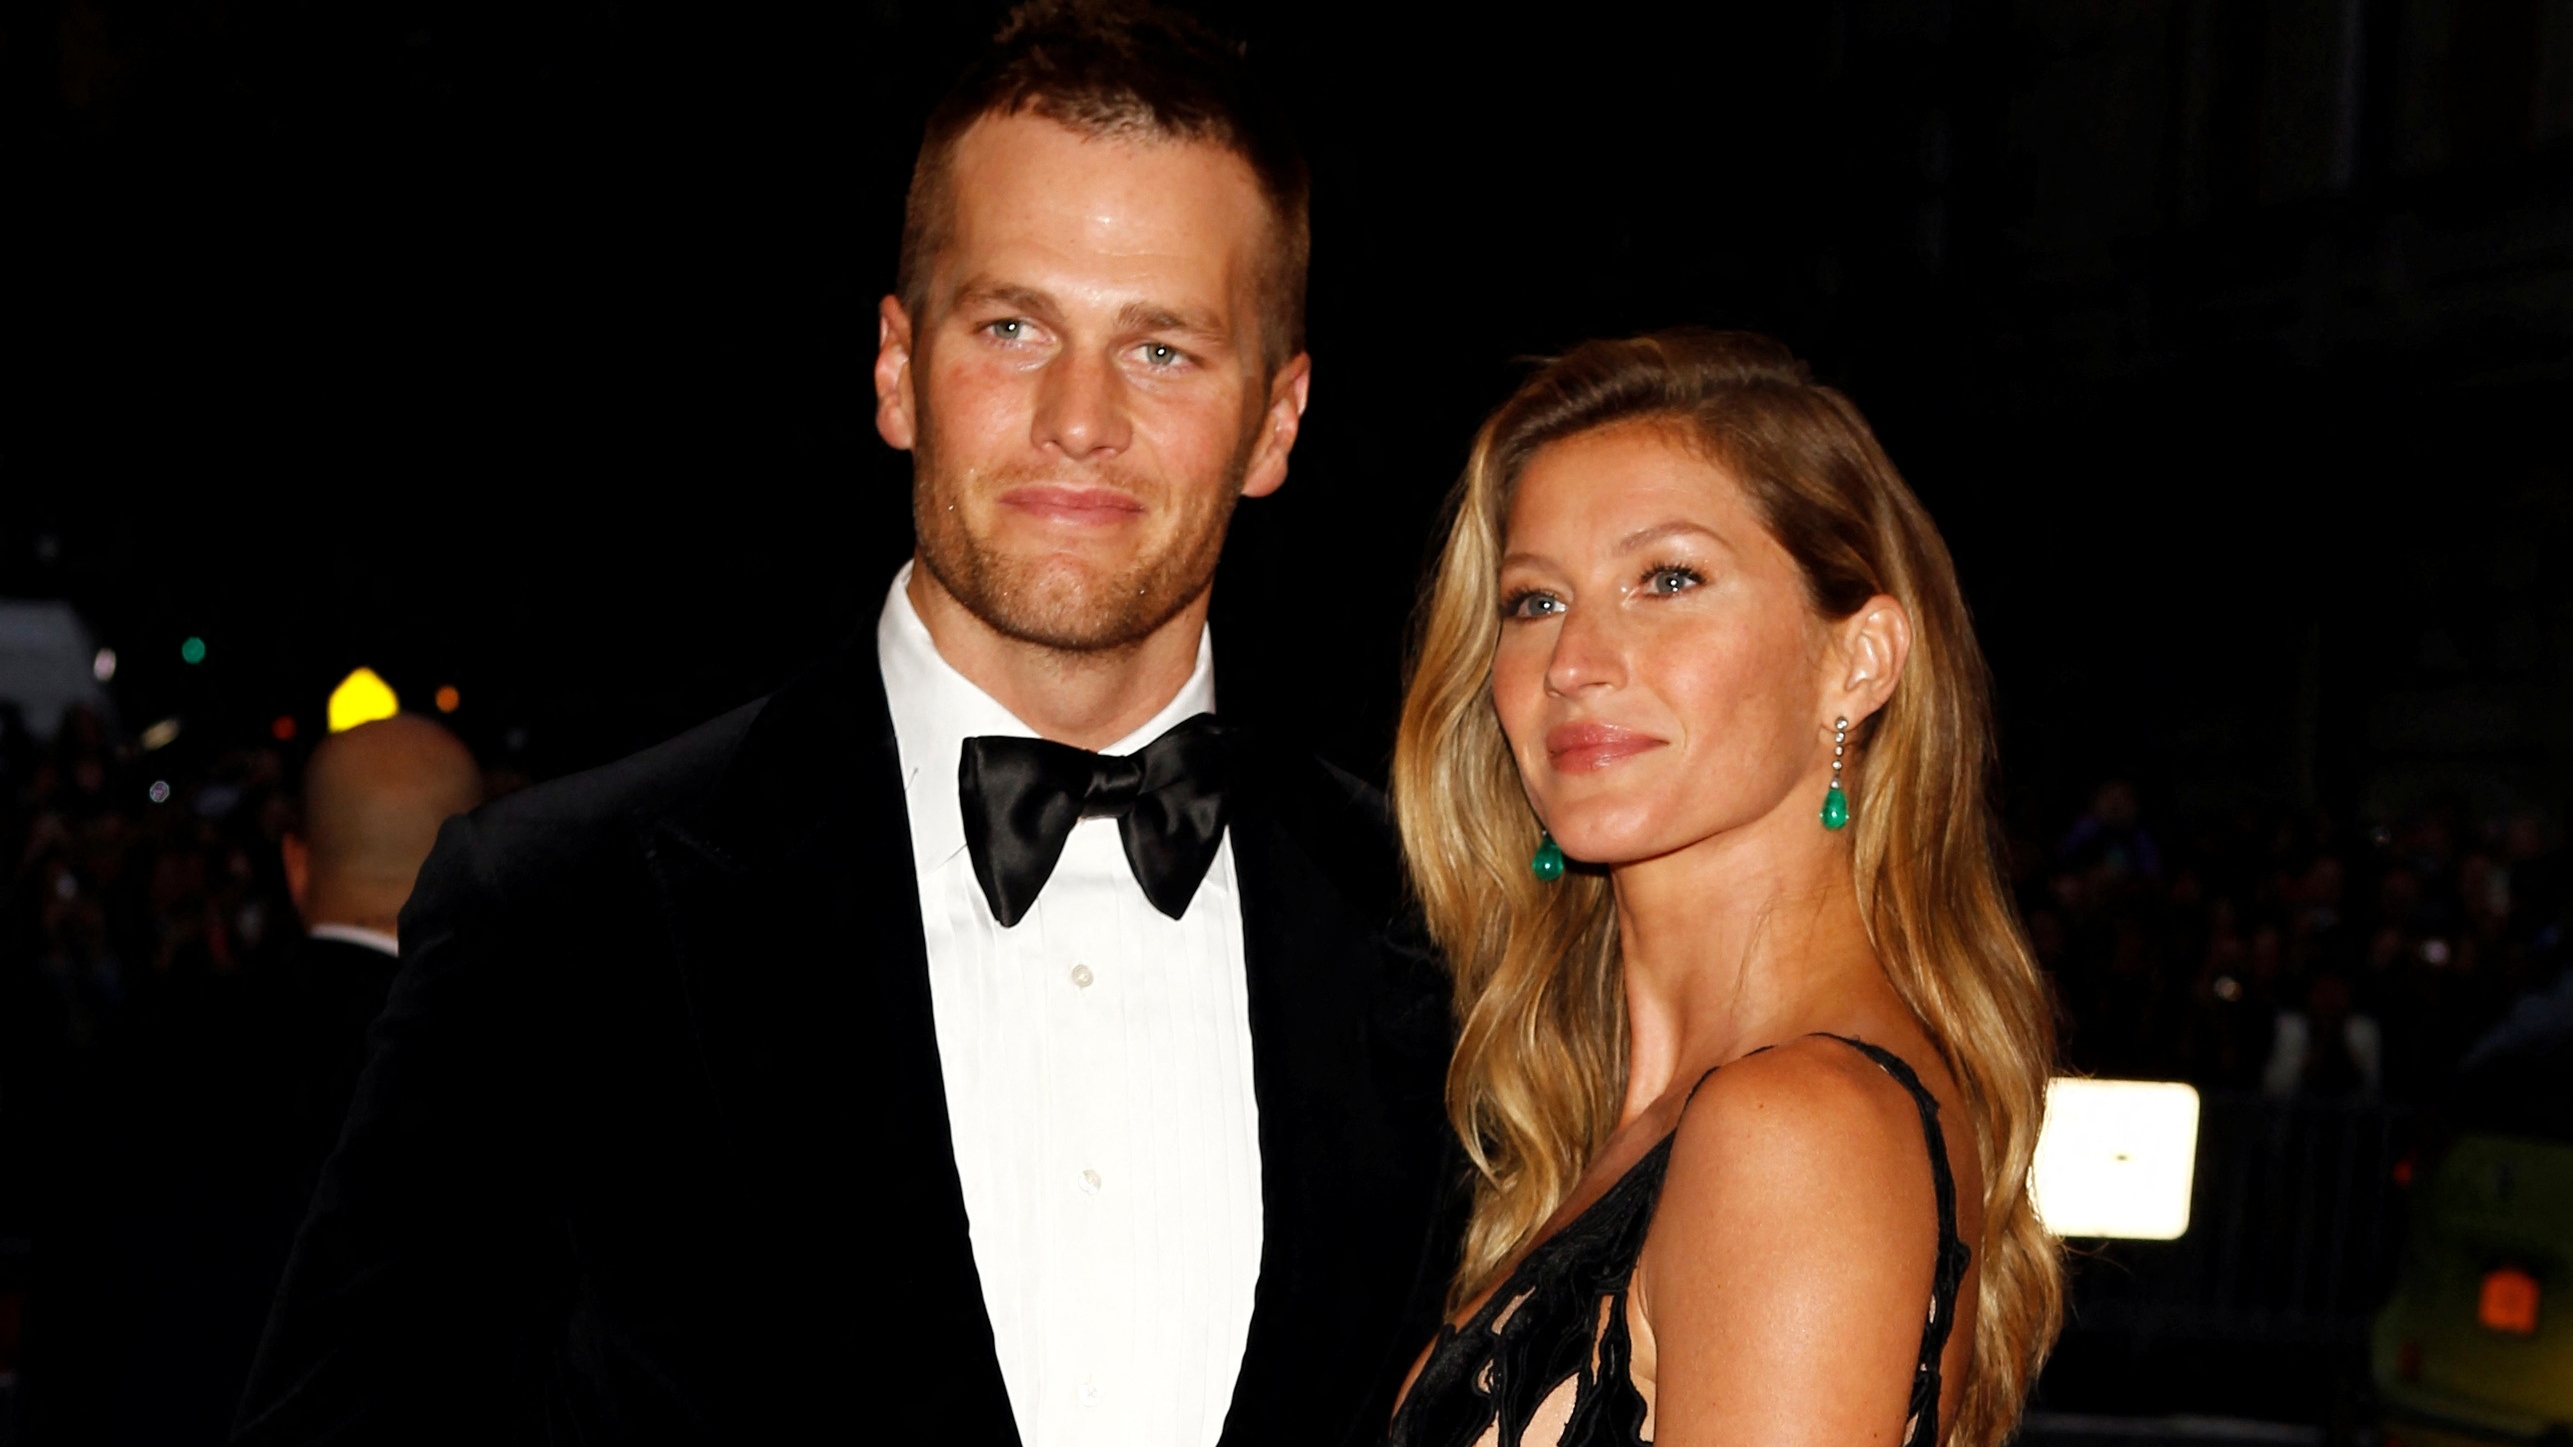 FILE PHOTO: NFL football player Tom Brady and Gisele Bundchen arrive at the Metropolitan Museum of Art Costume Institute Gala Benefit celebrating the opening of "Charles James: Beyond Fashion" in Upper Manhattan, New York May 5, 2014.  REUTERS/Carlo Allegri (UNITED STATES  - Tags: ENTERTAINMENT FASHION SPORT FOOTBALL)/File Photo